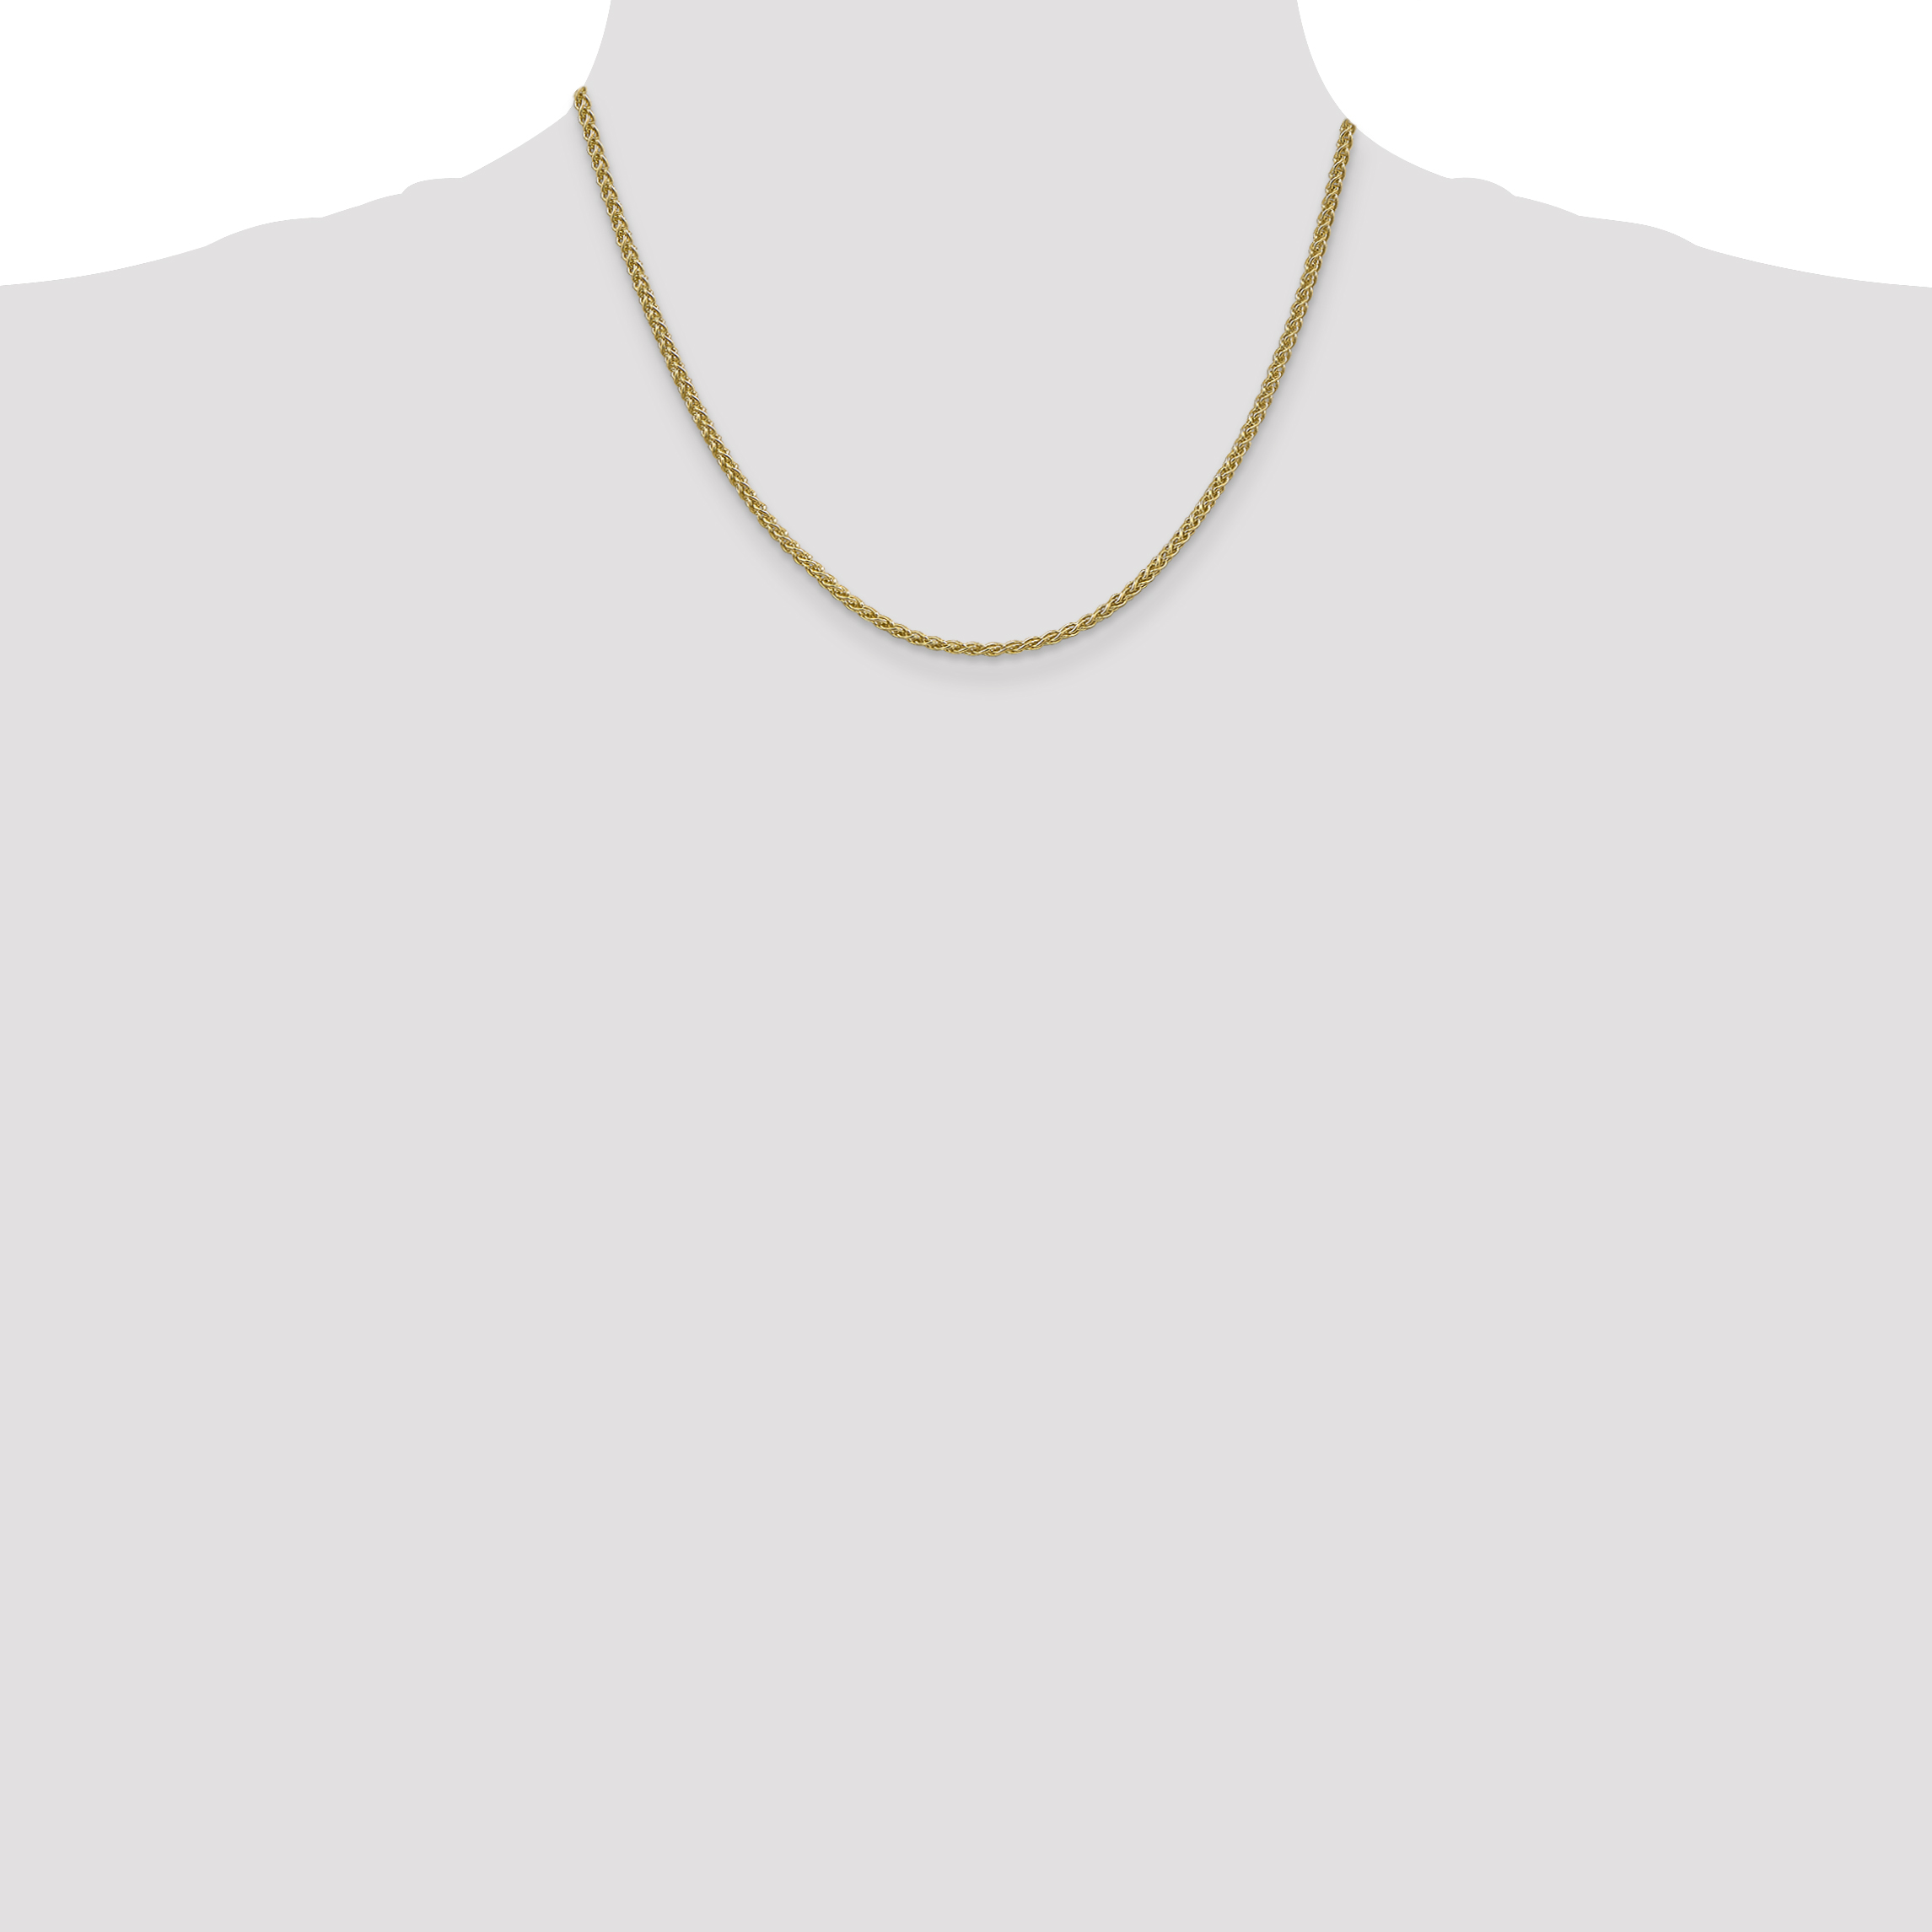 14k Yellow Gold 2mm Spiga Chain Necklace 18 Inch Pendant Mothers Day